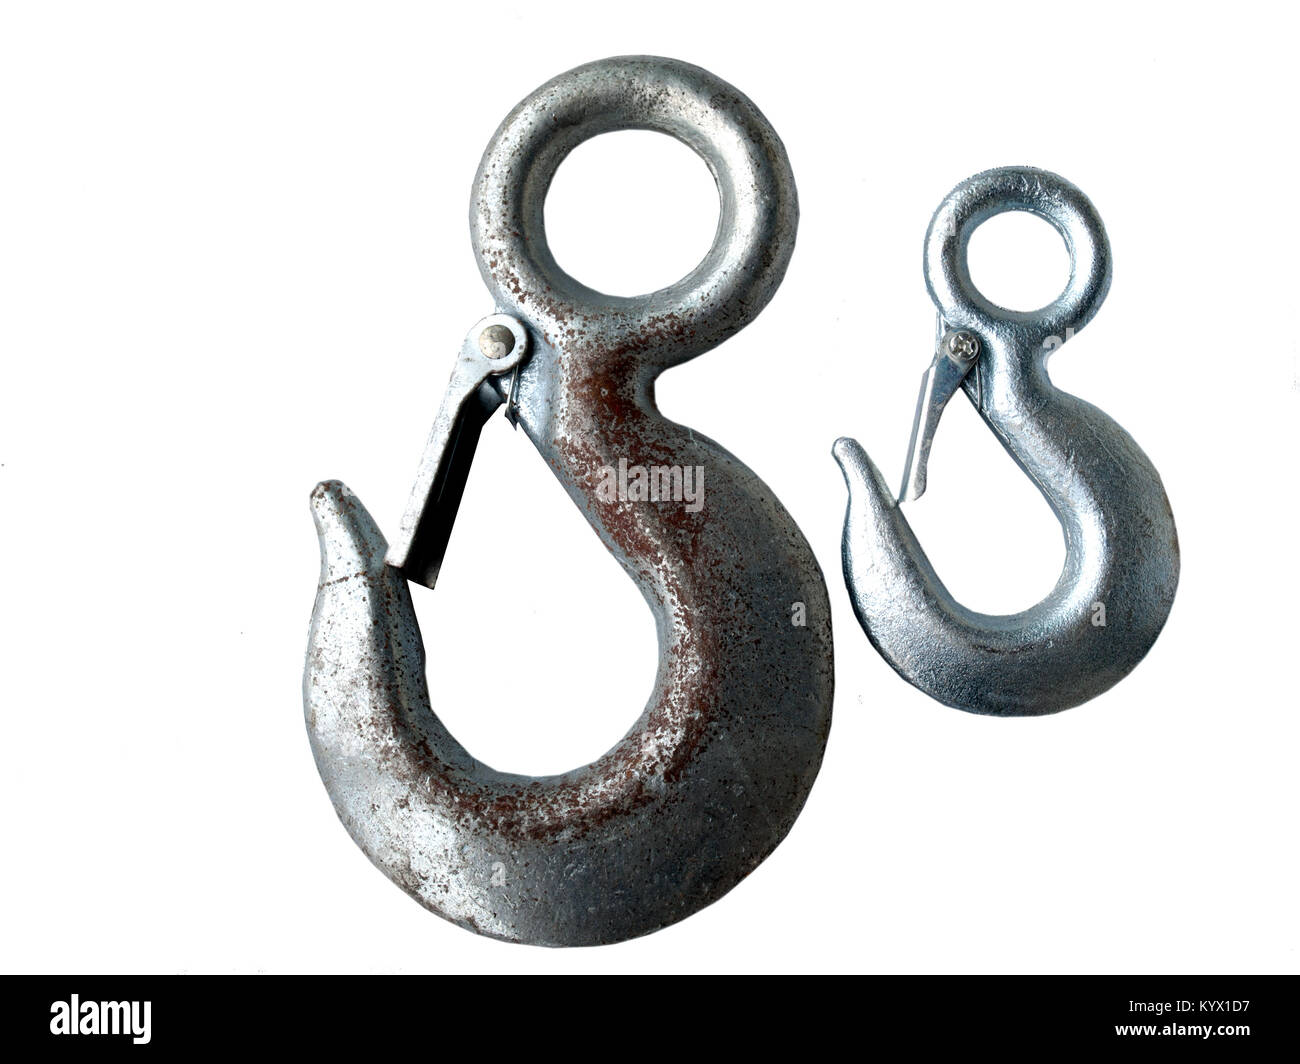 https://c8.alamy.com/comp/KYX1D7/towing-hook-used-to-haul-equipment-KYX1D7.jpg